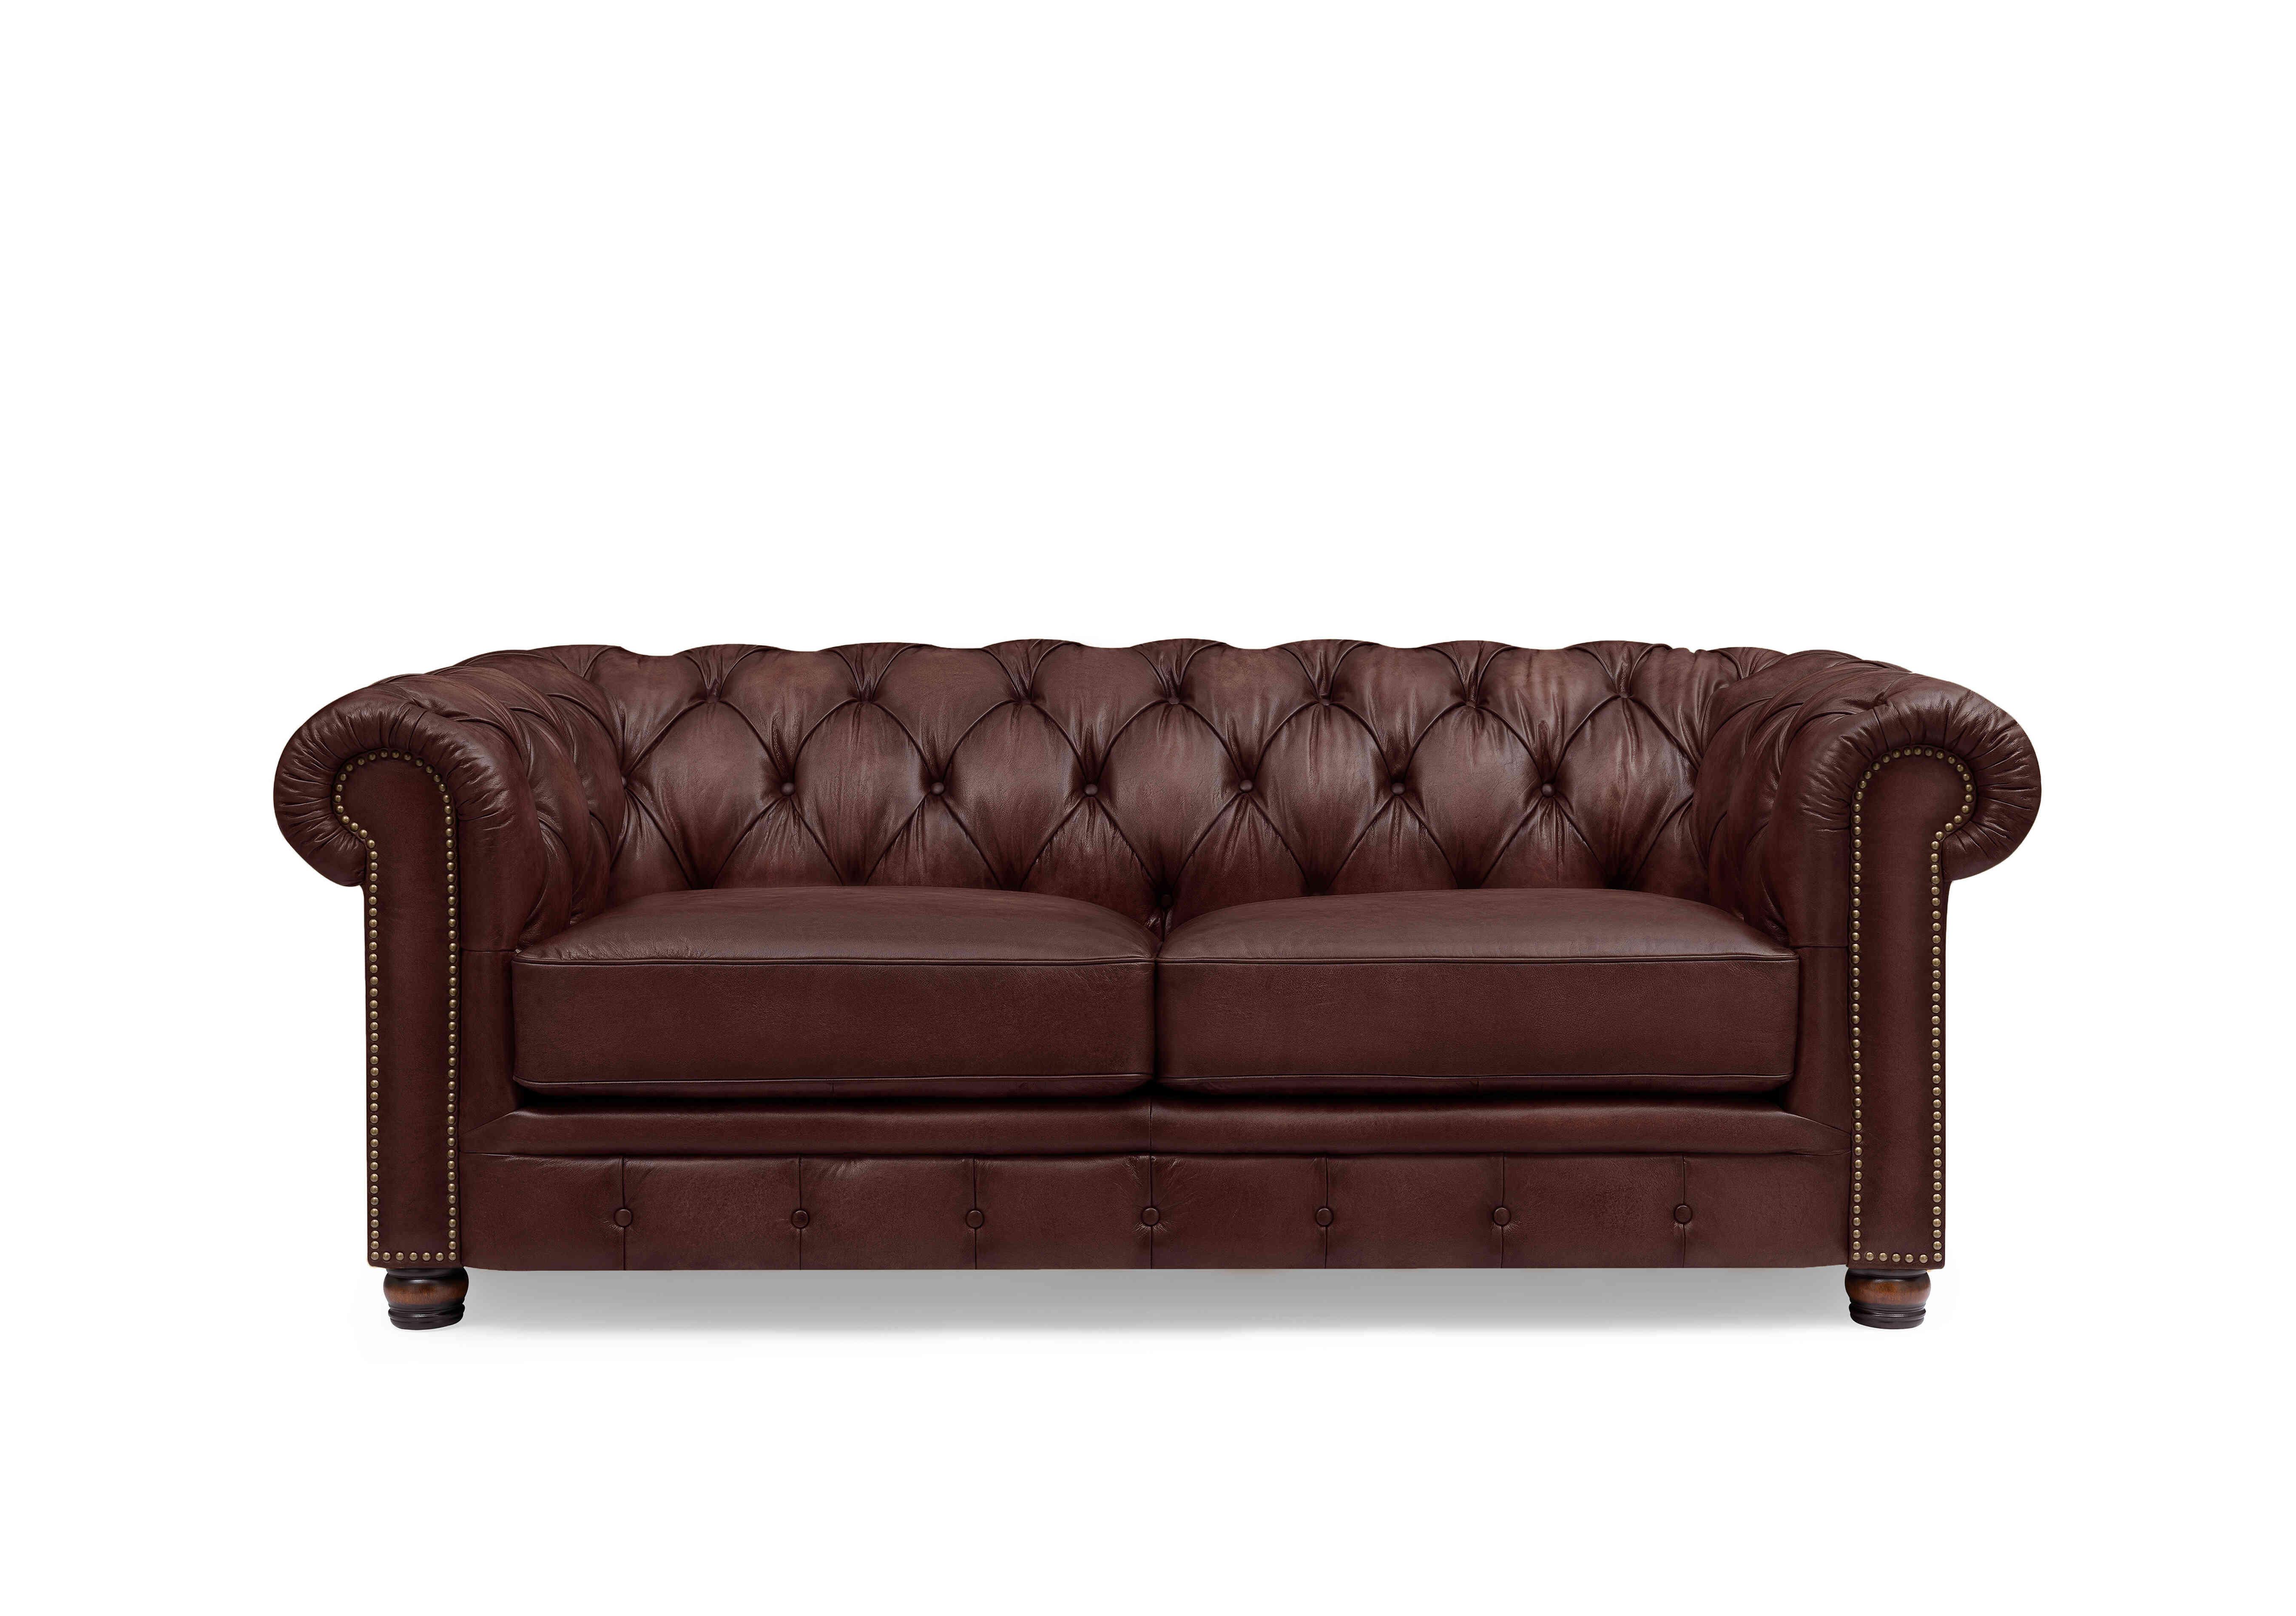 Shackleton 3 Seater Leather Chesterfield Sofa in X3y1-1964ls Merlot on Furniture Village